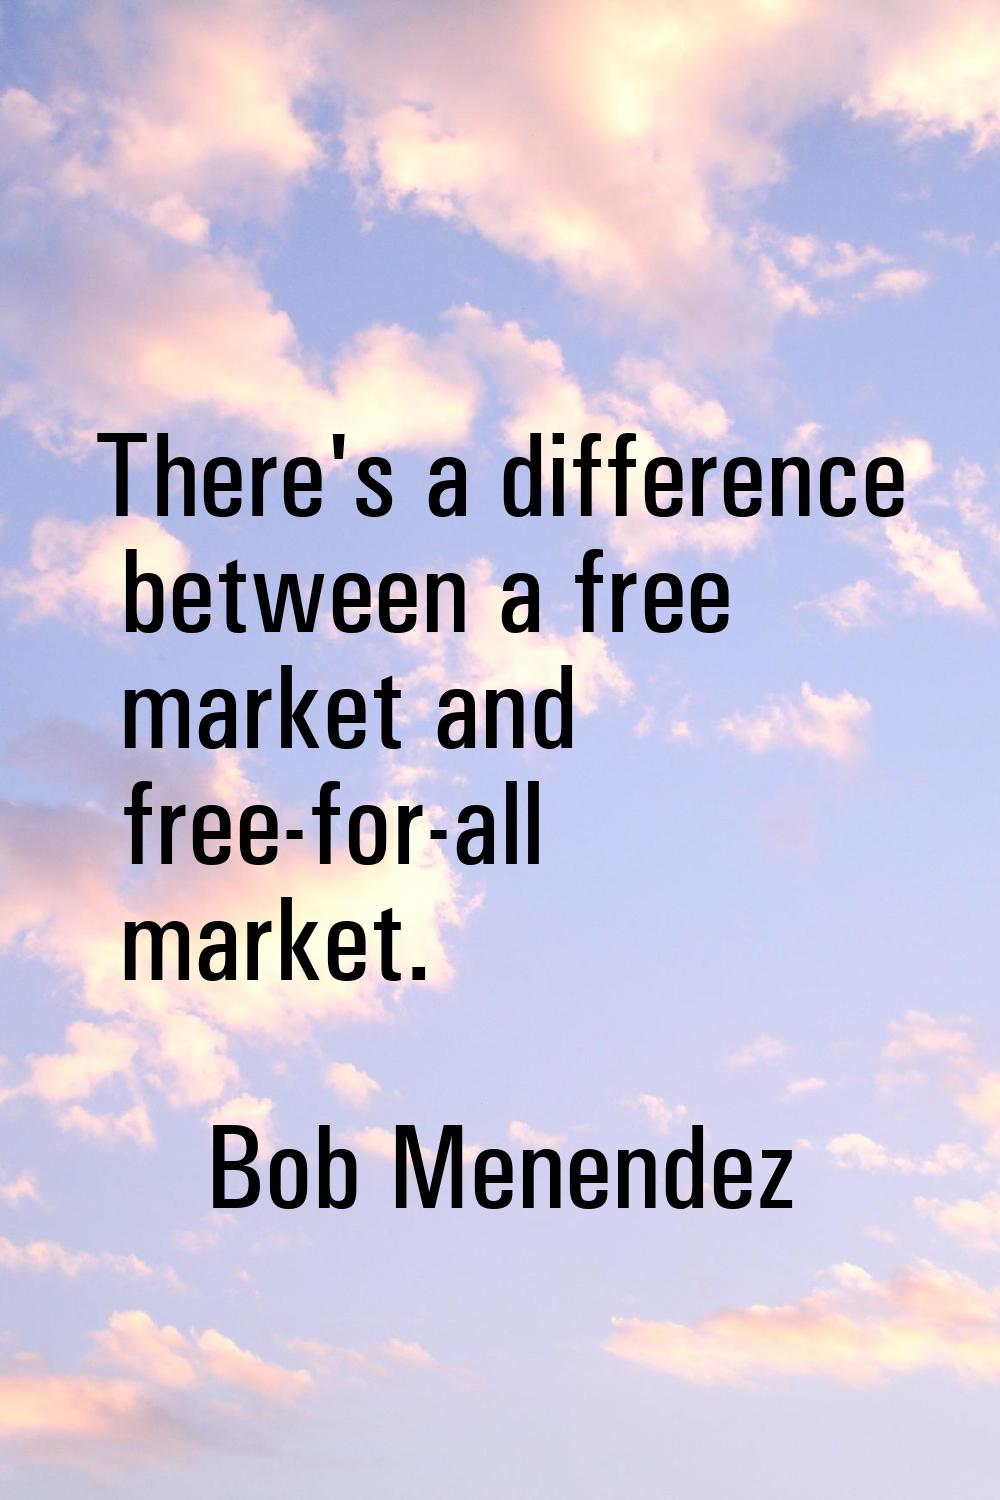 There's a difference between a free market and free-for-all market.